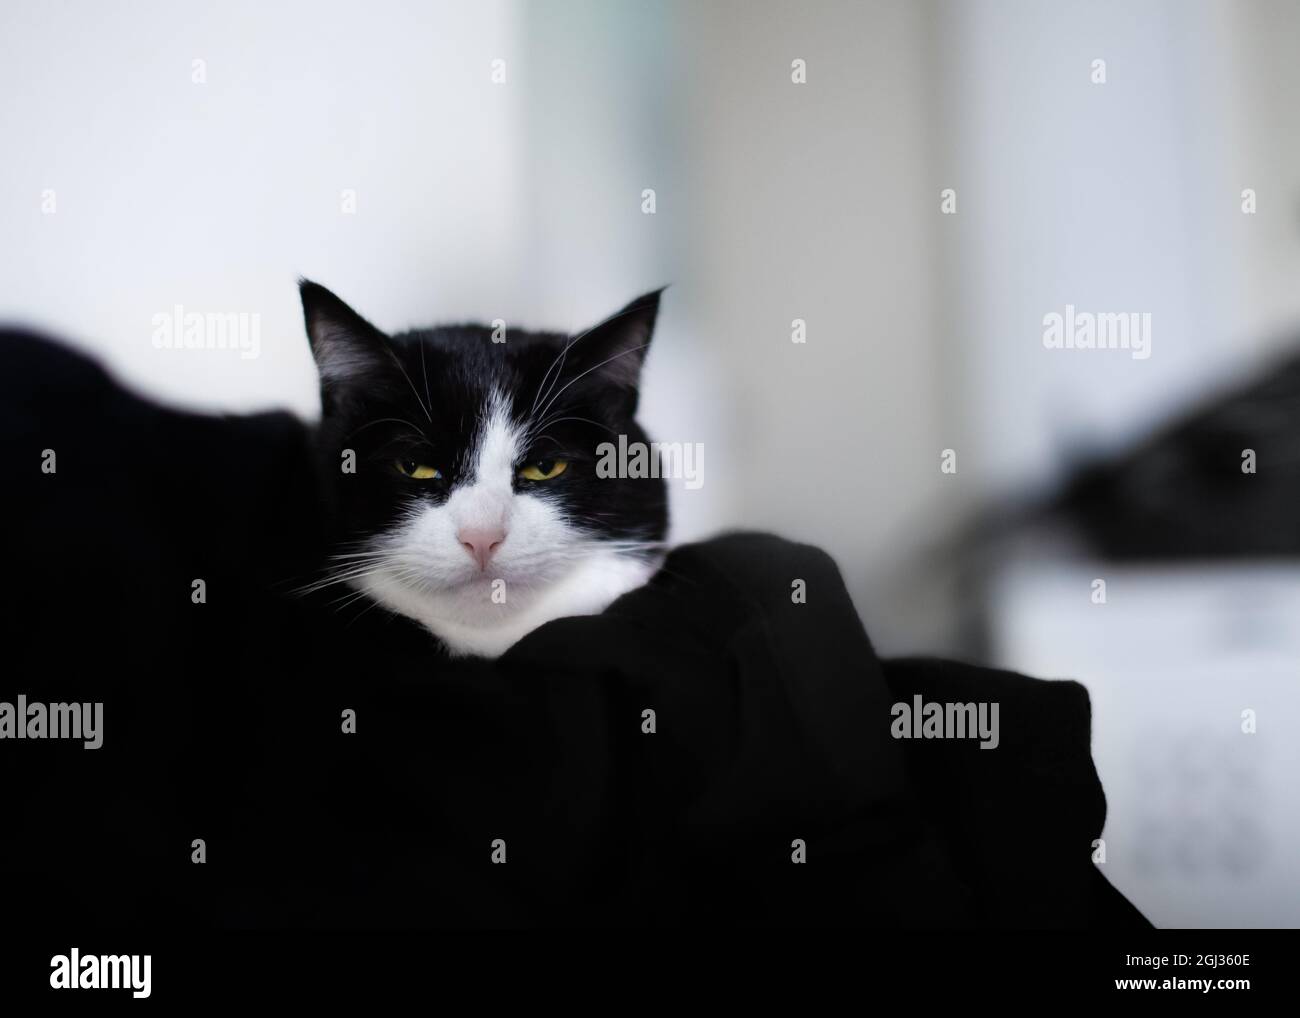 Closeup of a black and white cat, sitting behind black fabric. Looking angry / grumpy. Stock Photo